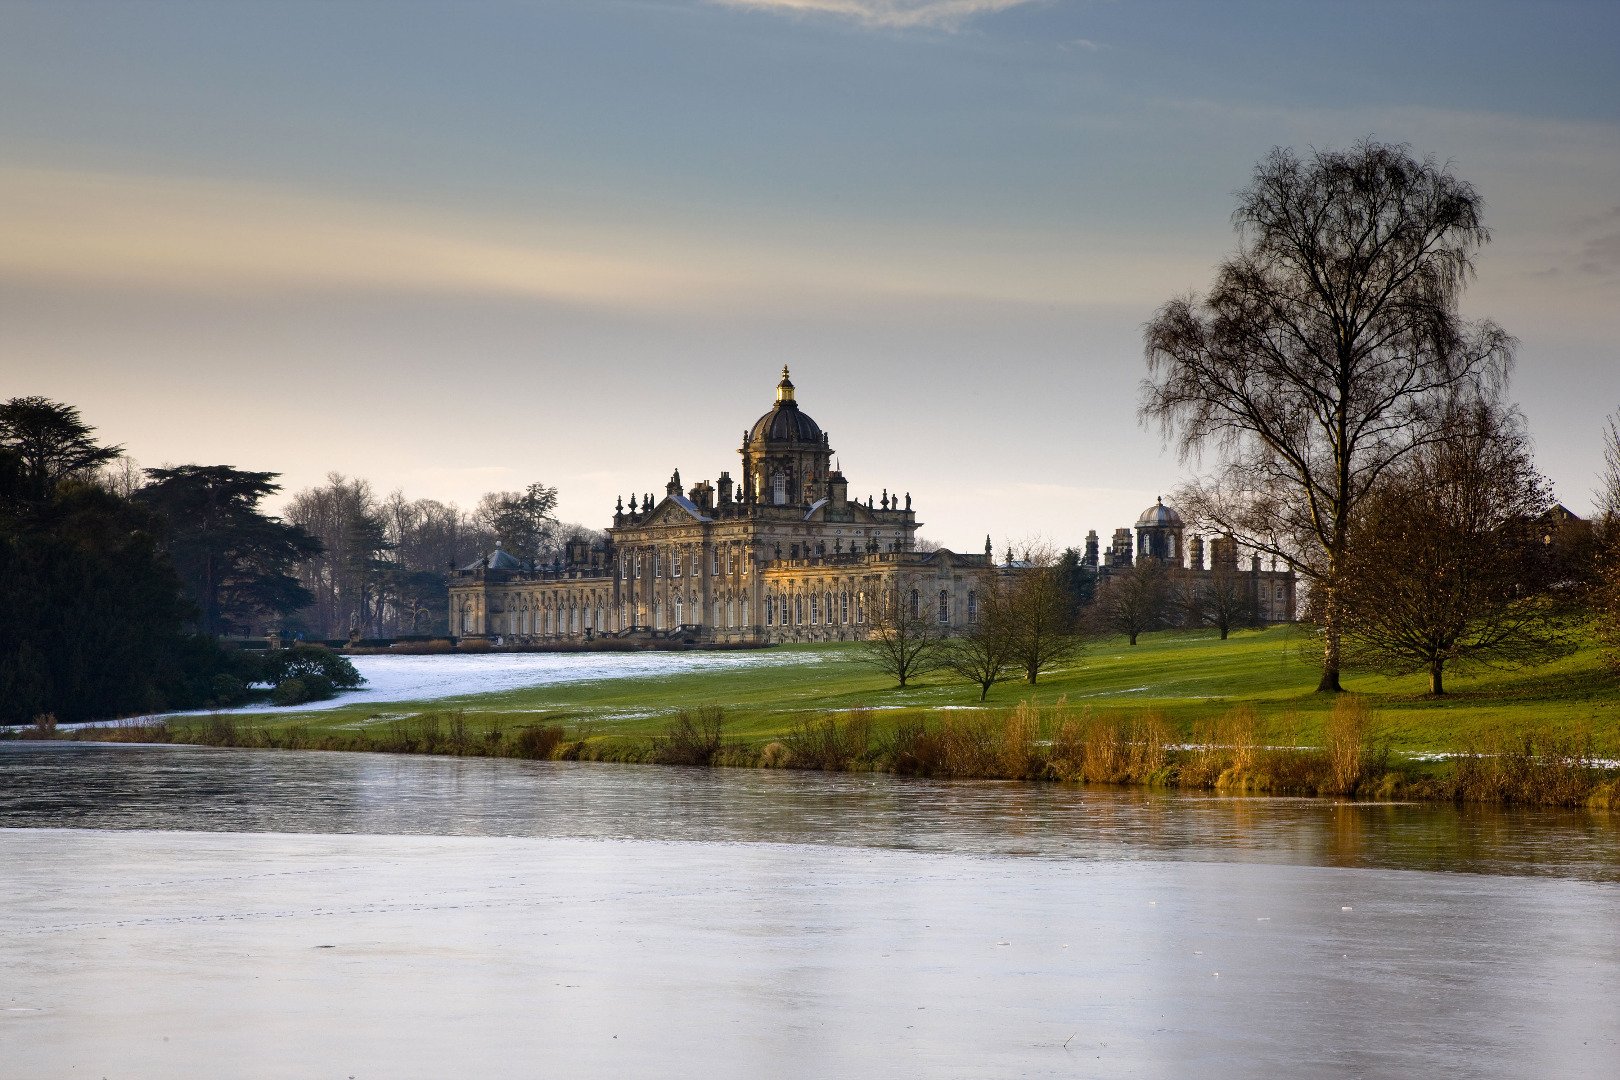 Image name castle howard and south lake mike kipling the 9 image from the post Yorkshire Stately Homes and Gardens in Yorkshire.com.